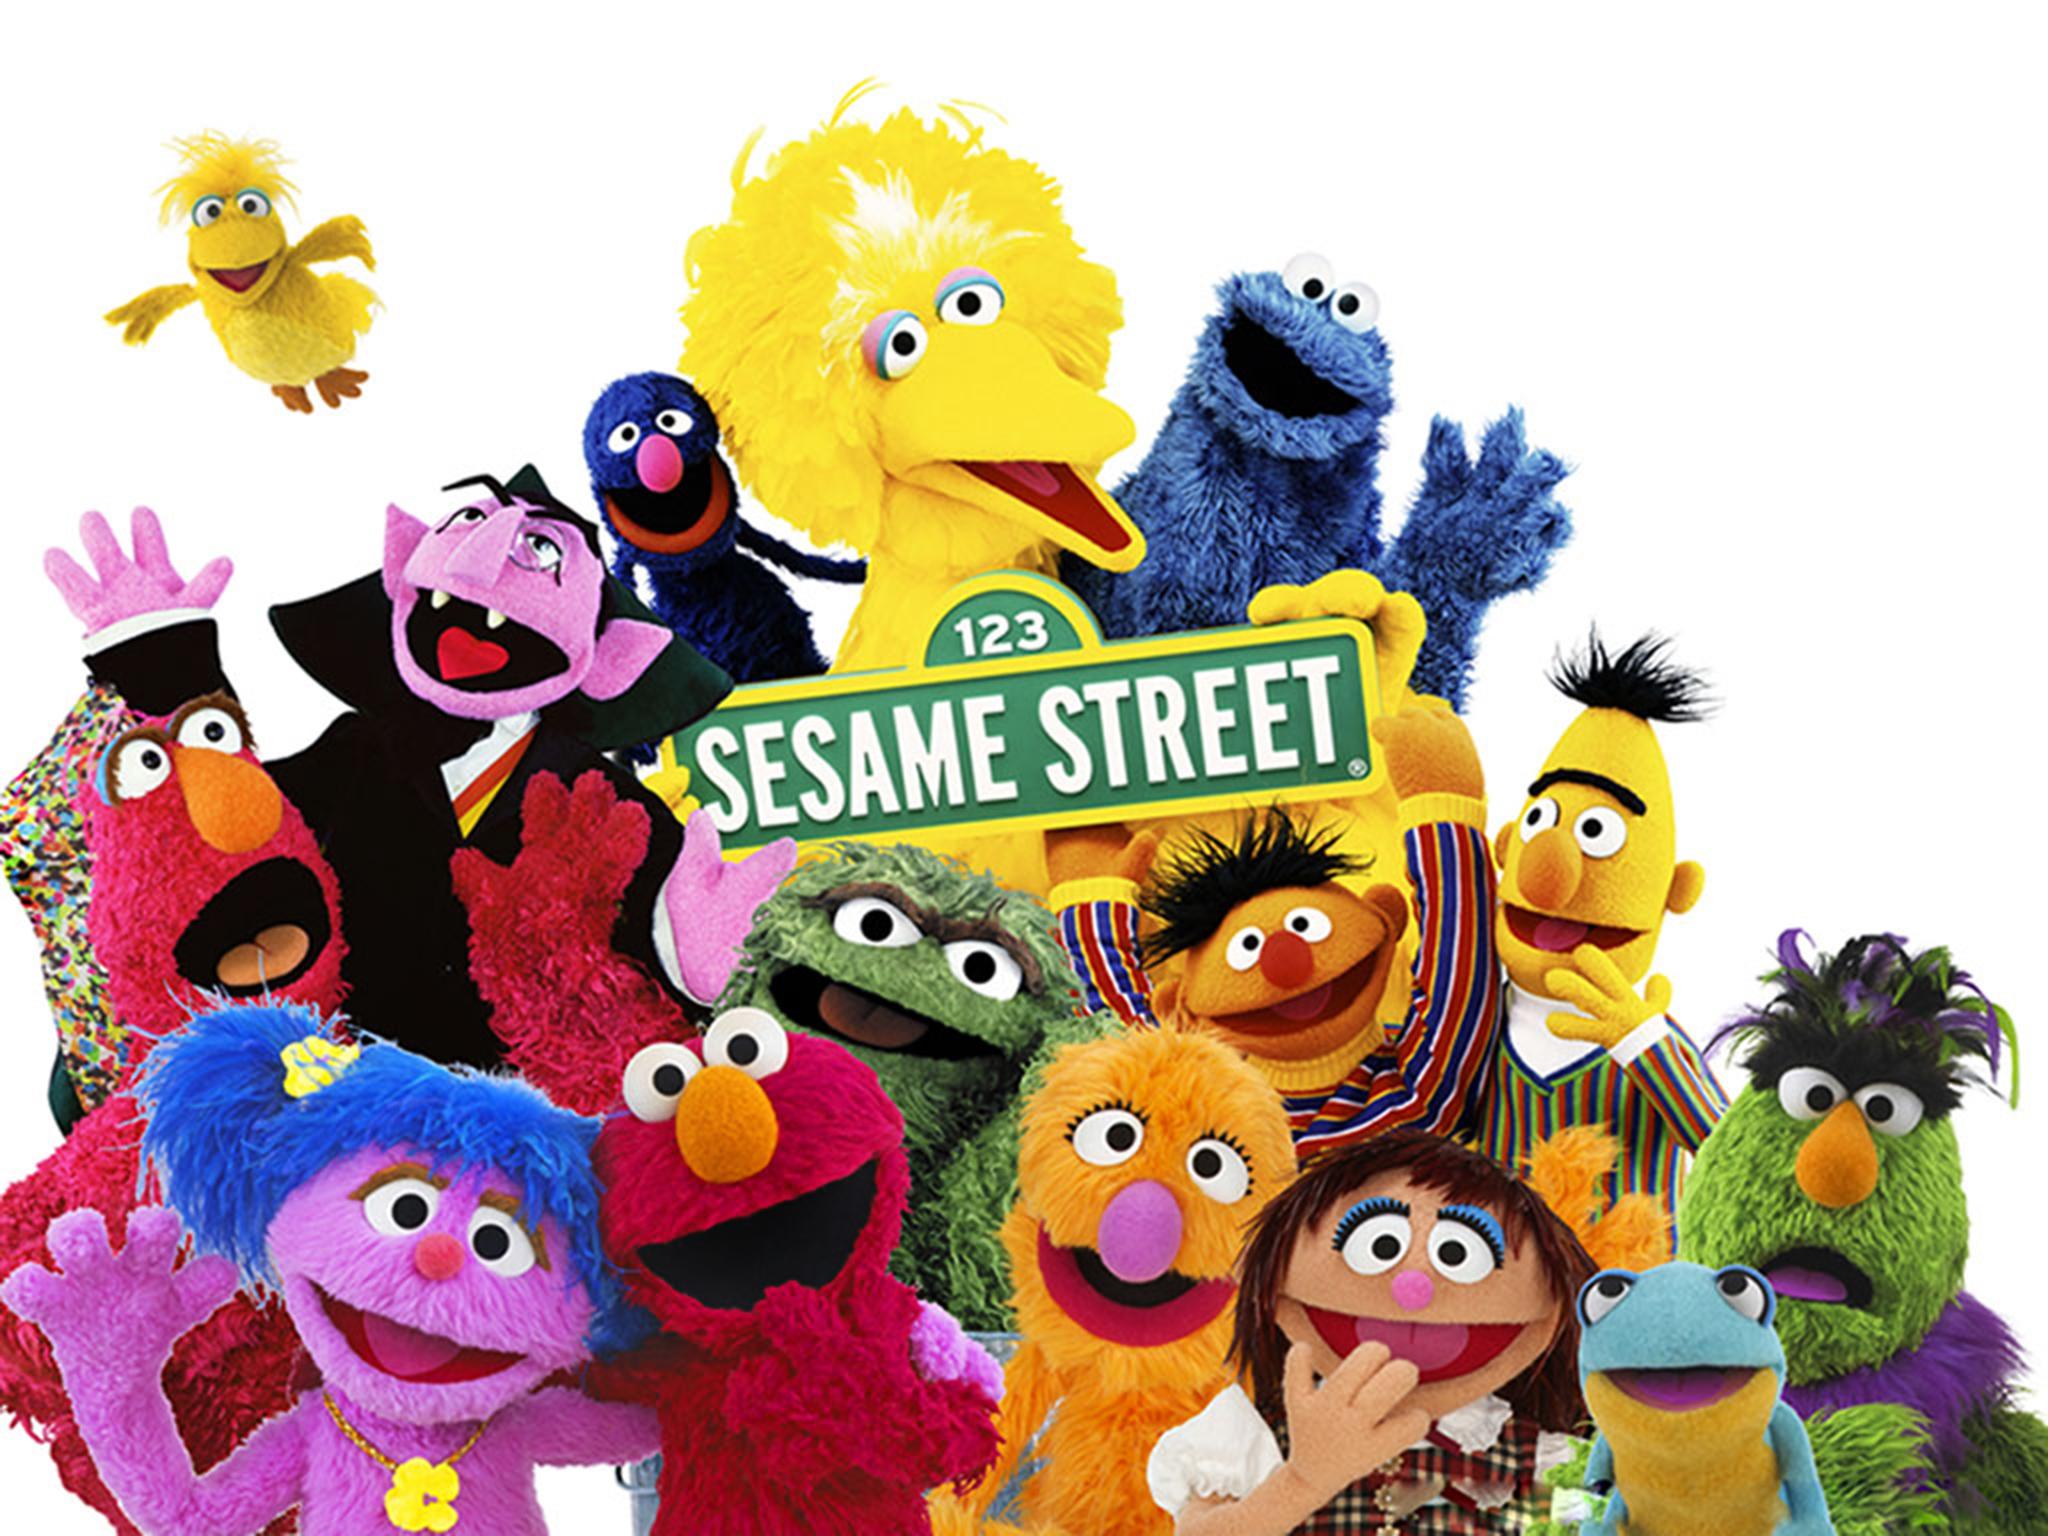 &#13;
The ‘Sesame Street’ theme tune has been used as a method of torture at Guantanamo Bay&#13;